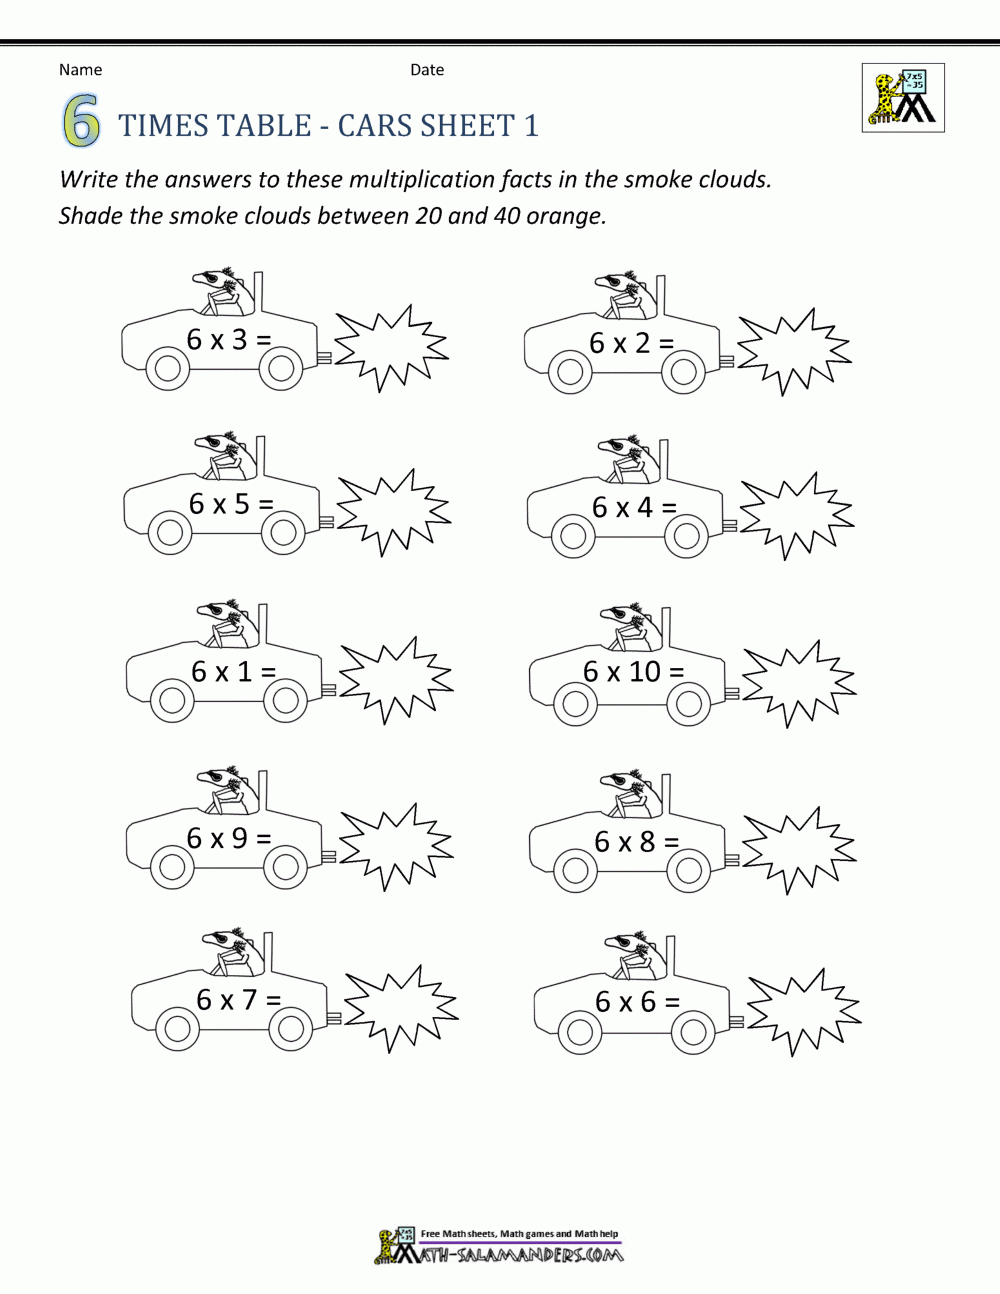 Times Table Worksheets - 6 Times Table Sheets pertaining to Worksheets Multiplication 6